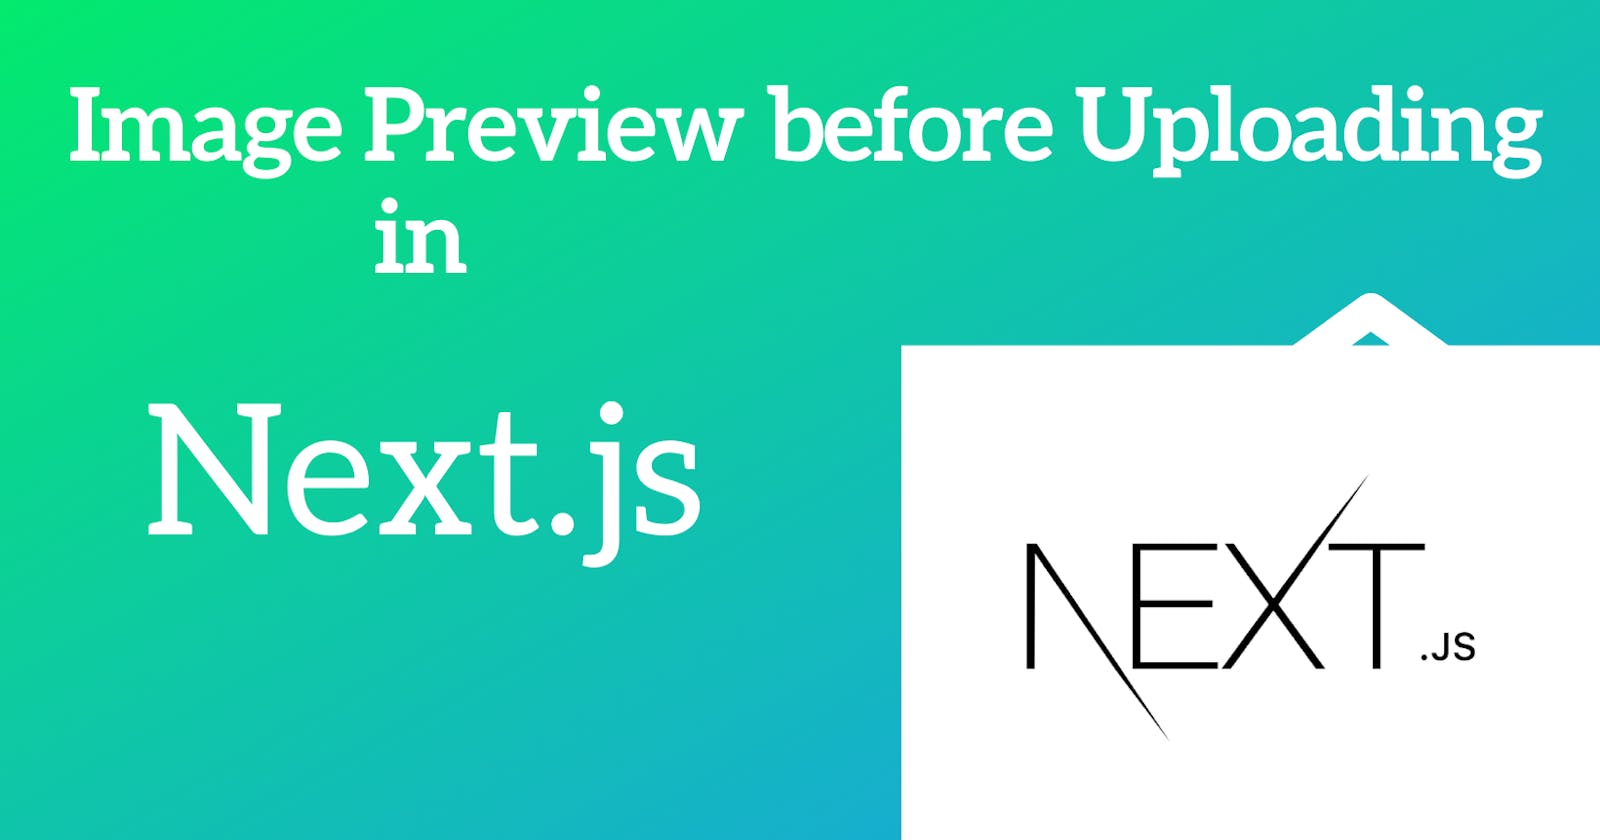 Next.js: Show Image Preview before Uploading